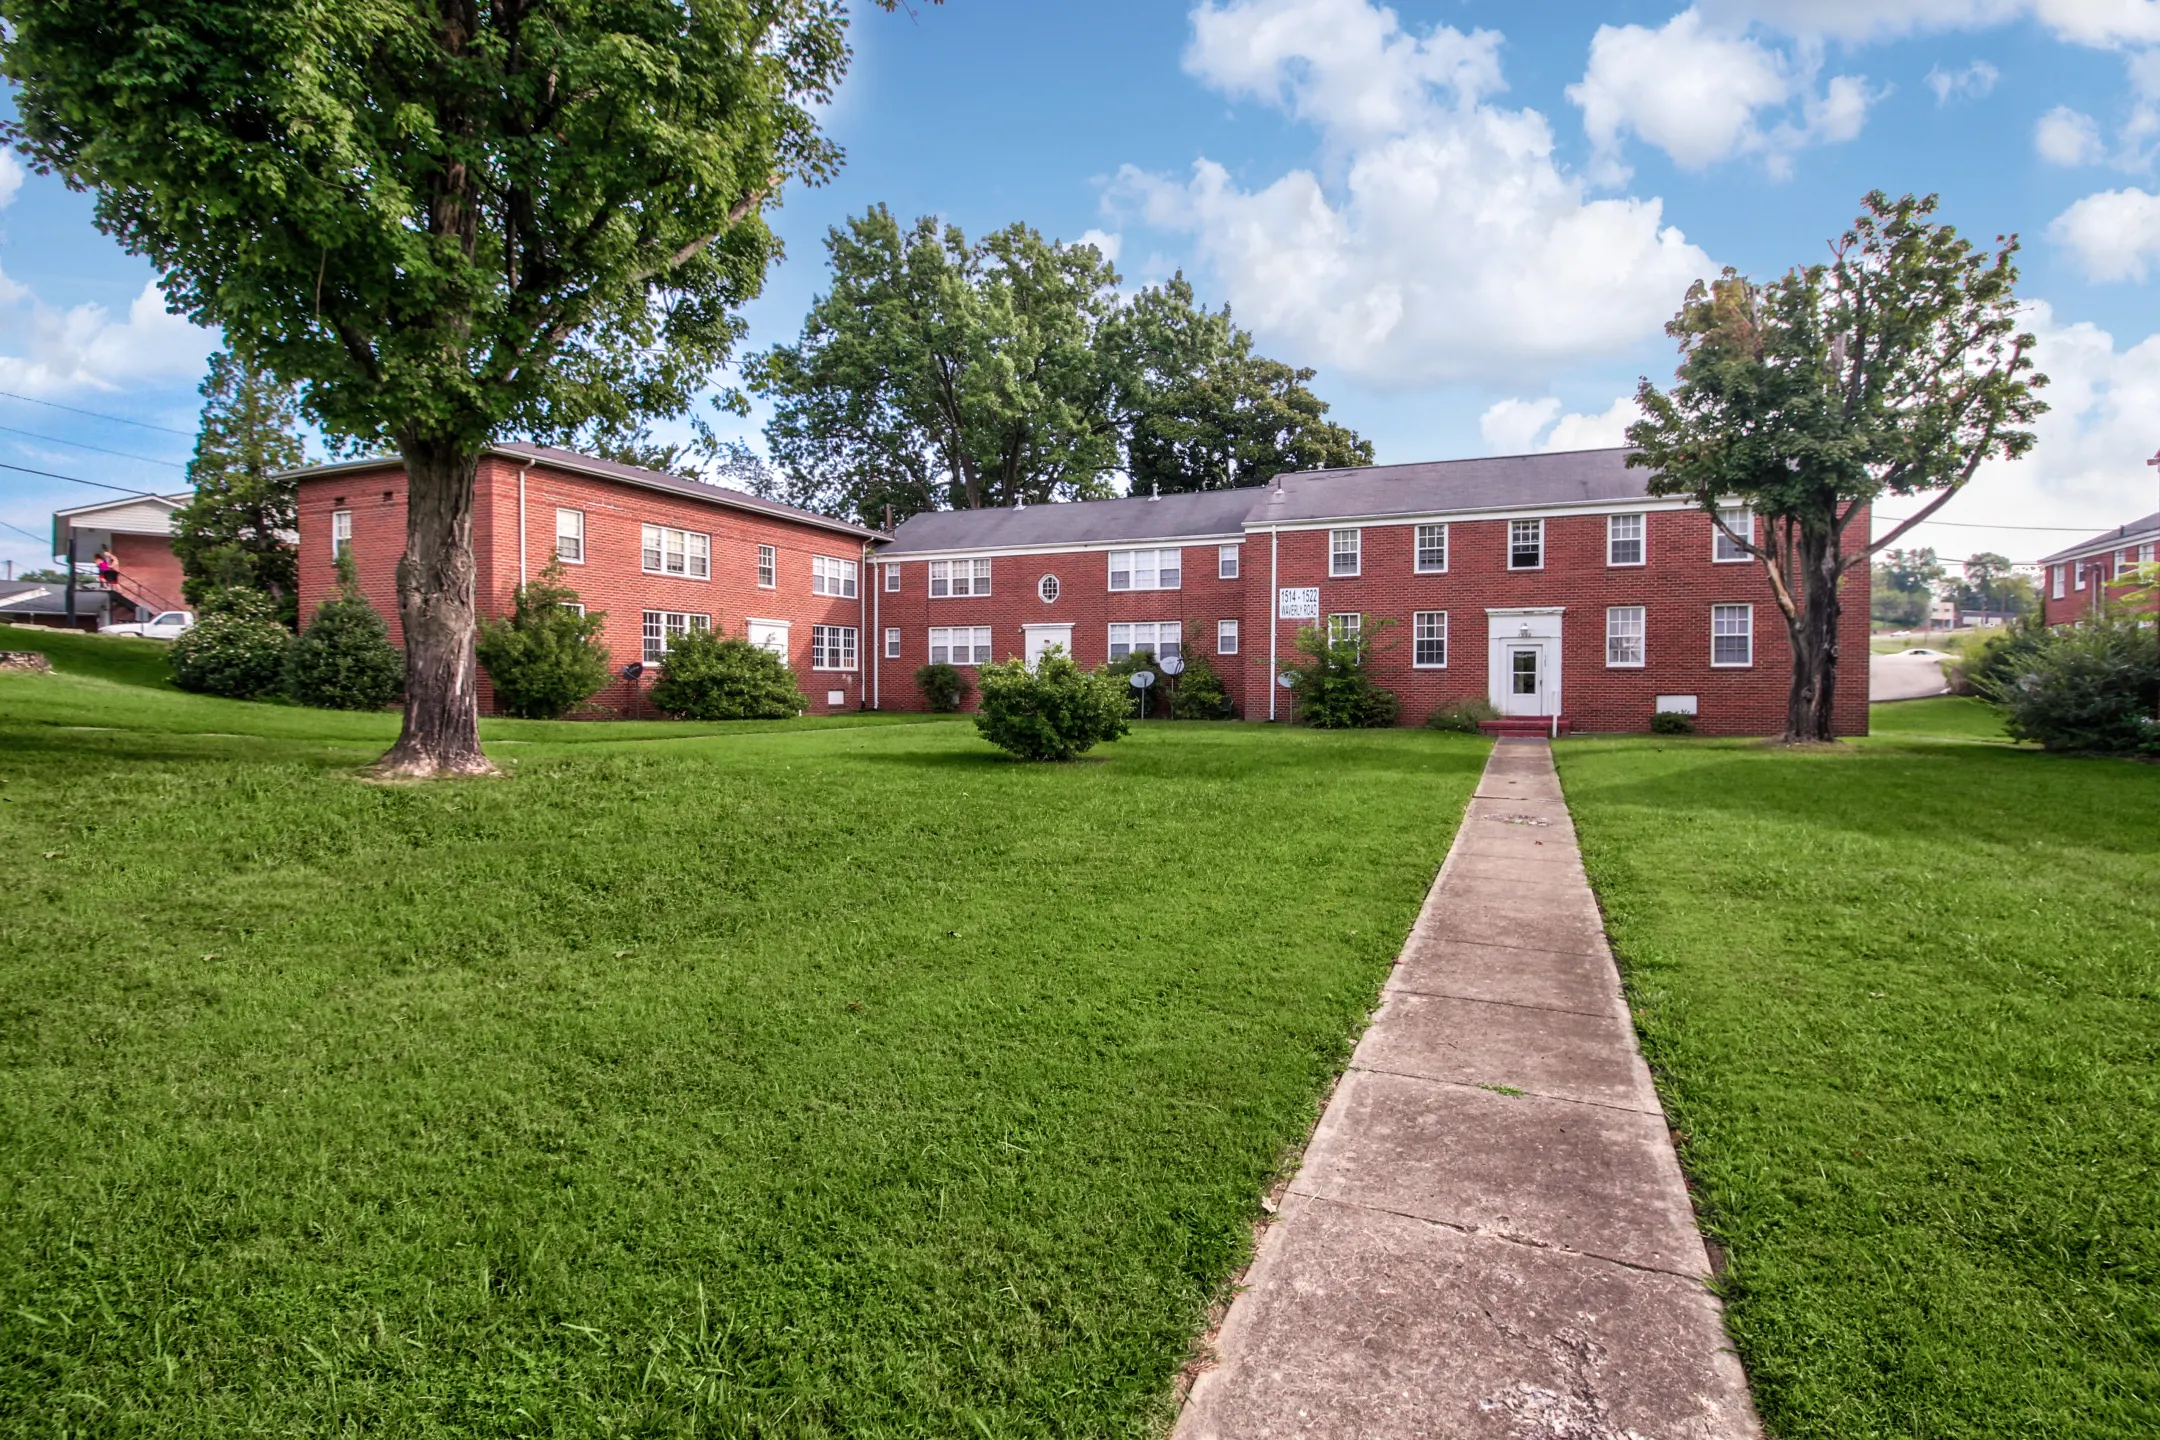 Building - The Gardens Apartments - Kingsport, TN